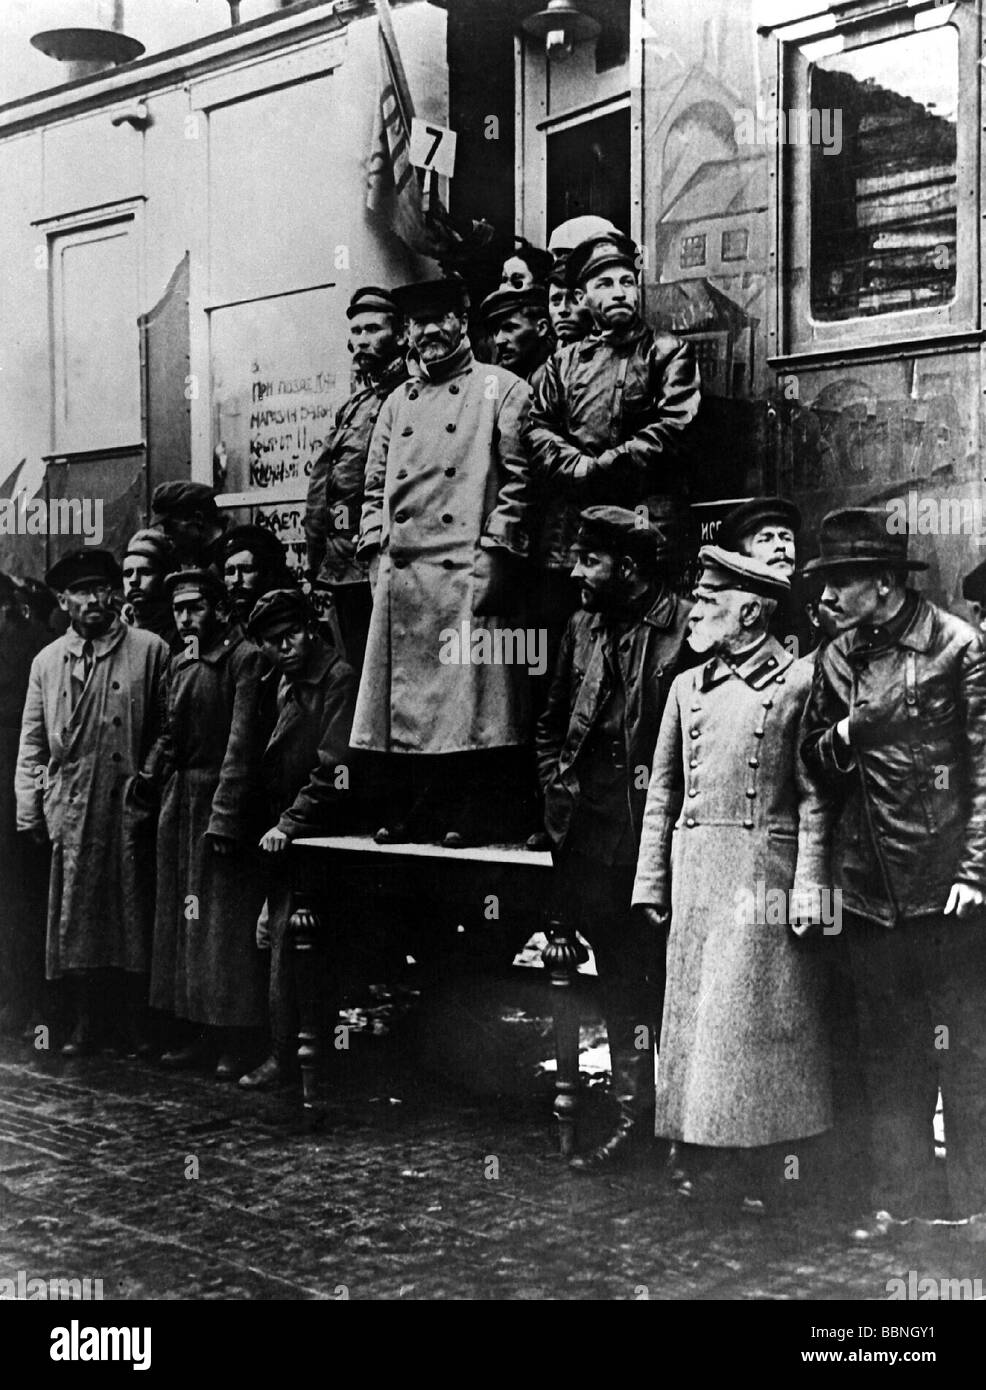 Kalinin, Mikhail Ivanovich, 19.11.1875 - 3.6.1946, Soviet politician, group picture, on the train 'October Revolution', during the Civil War 1919, with associates, Stock Photo